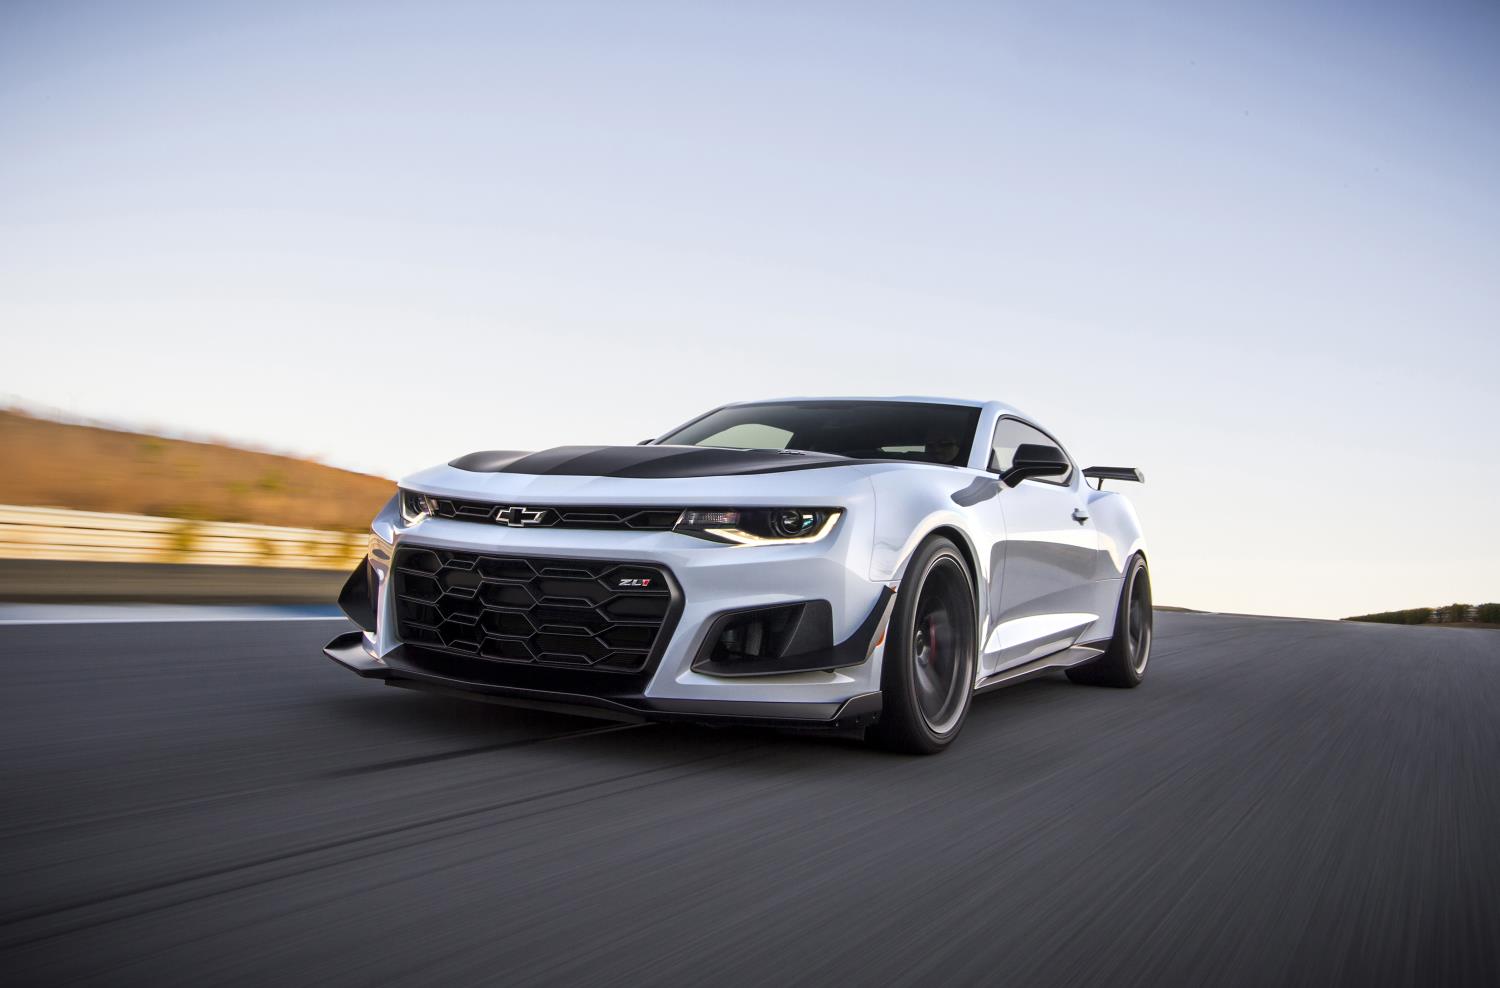 2019 Camaro ZL1 1LE Offers New 10-speed Automatic Transmission 